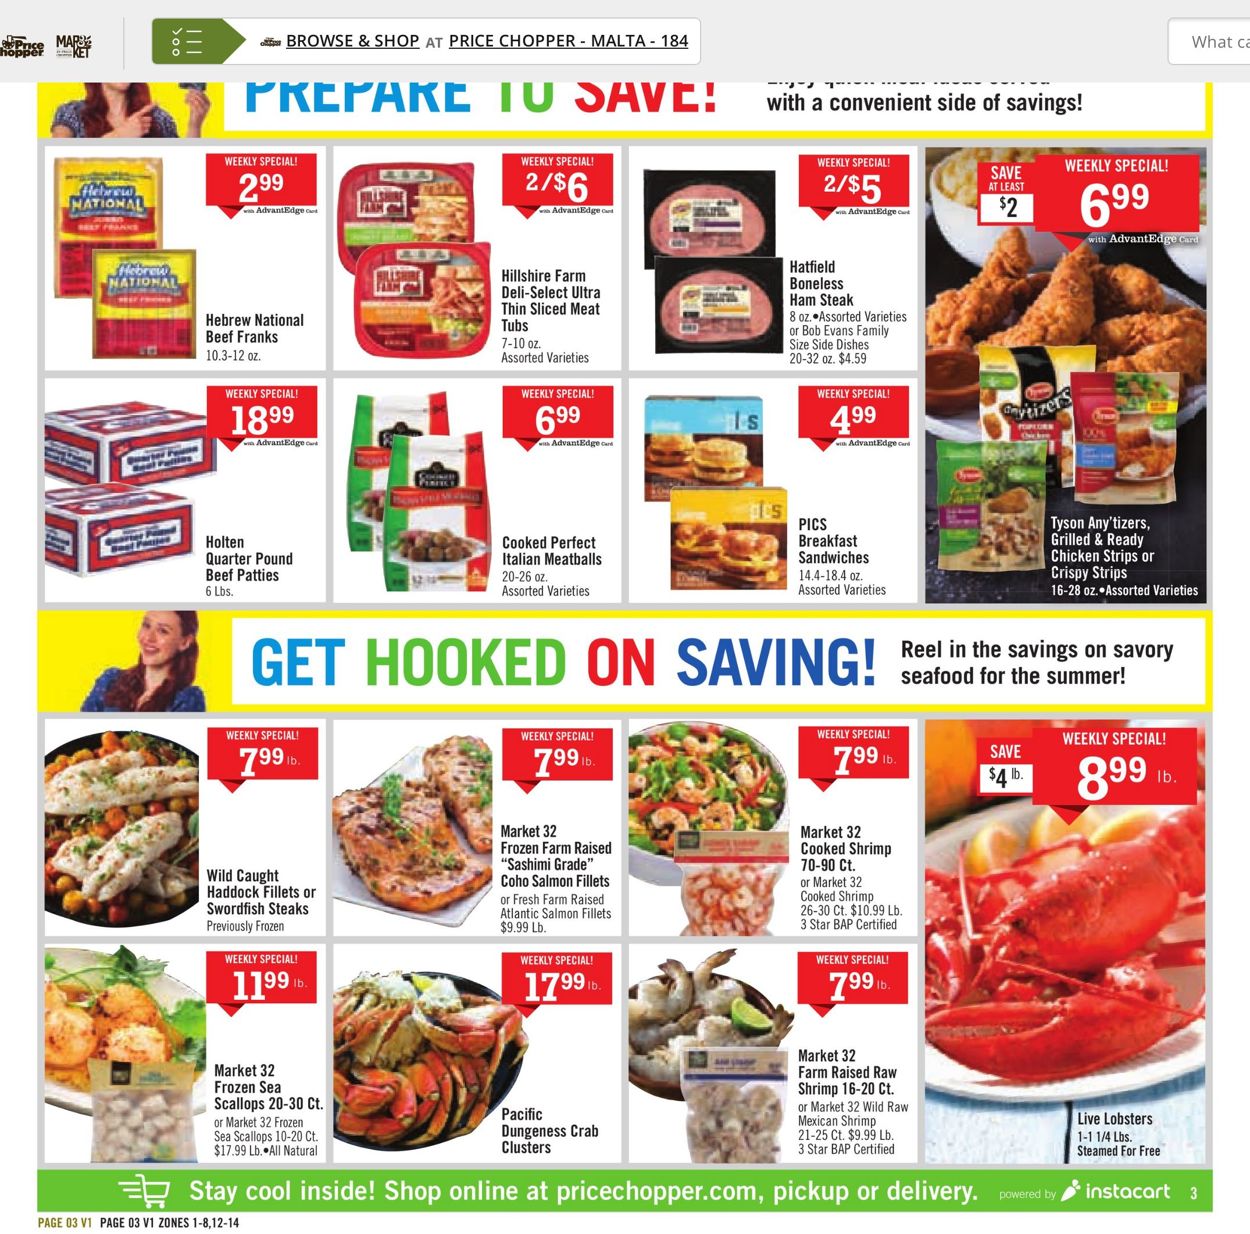 Price Chopper Current weekly ad 07/11 - 07/17/2021 [3] - frequent-ads.com